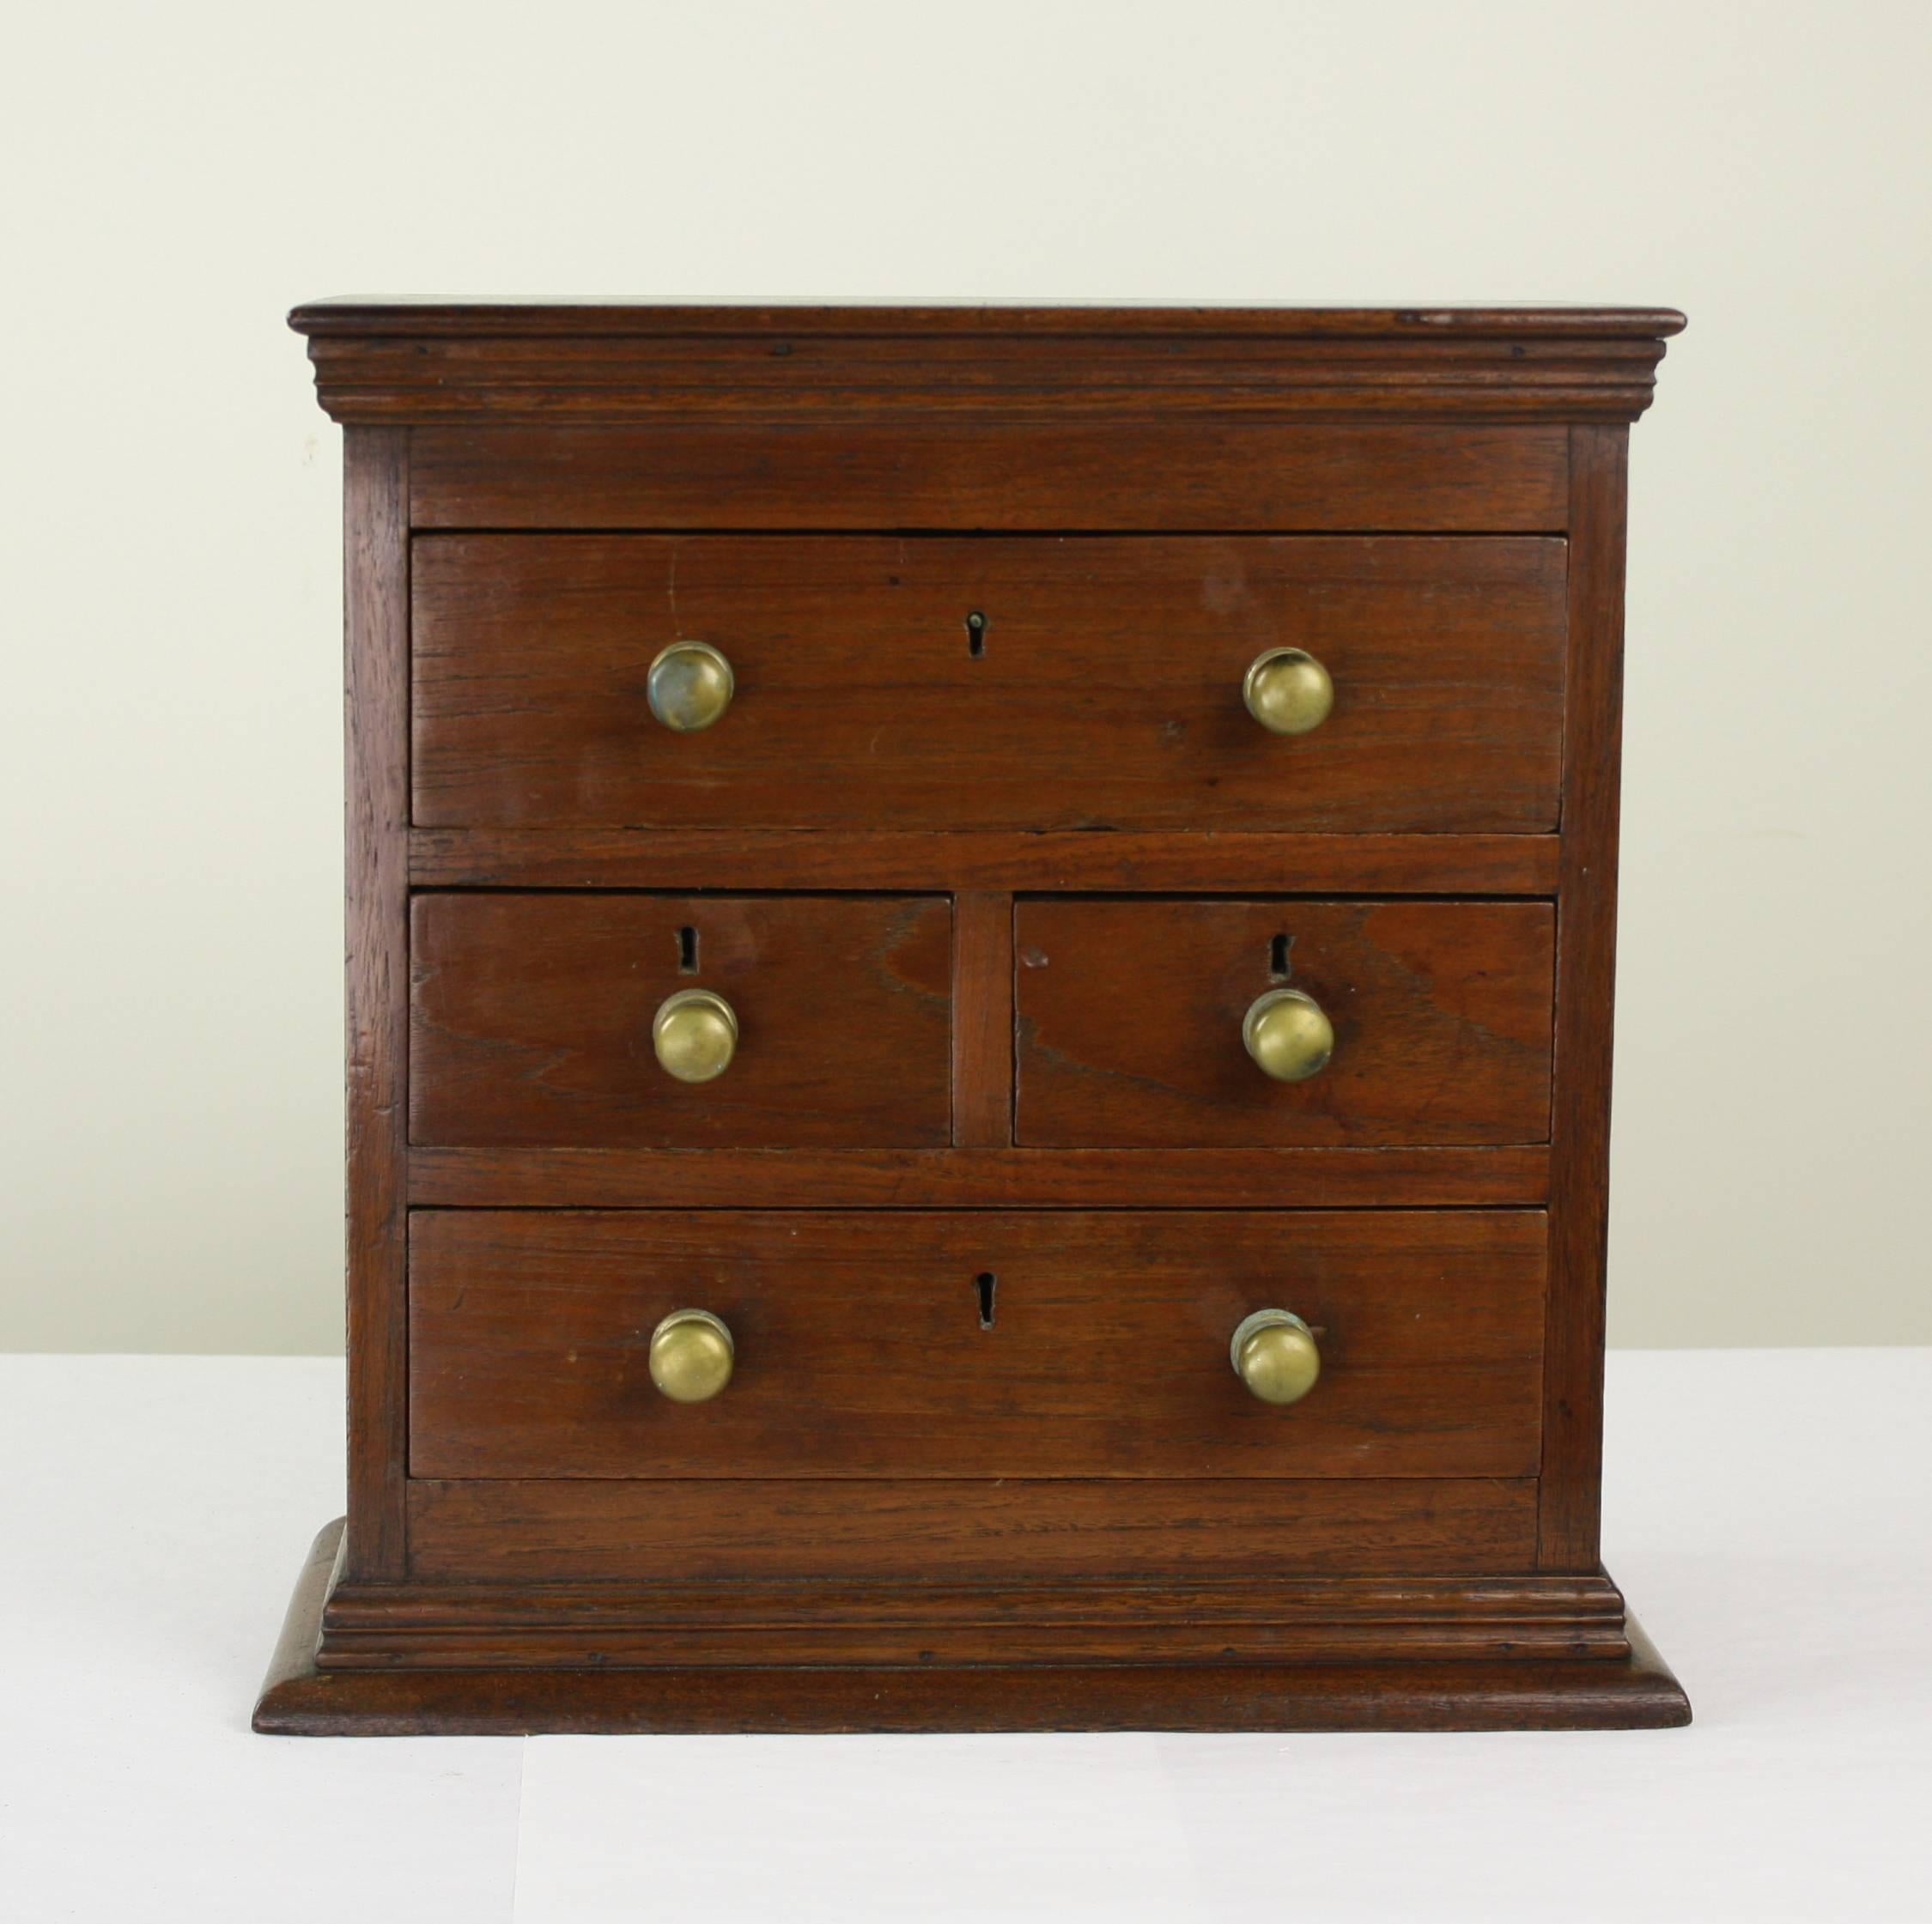 A beautifully fashioned little chest of drawers in teak. Handsome mouldings at top and bottom and lovely antique patina. Great for jewelry or as a decorative conversation starter. Possible apprentices' practice piece.